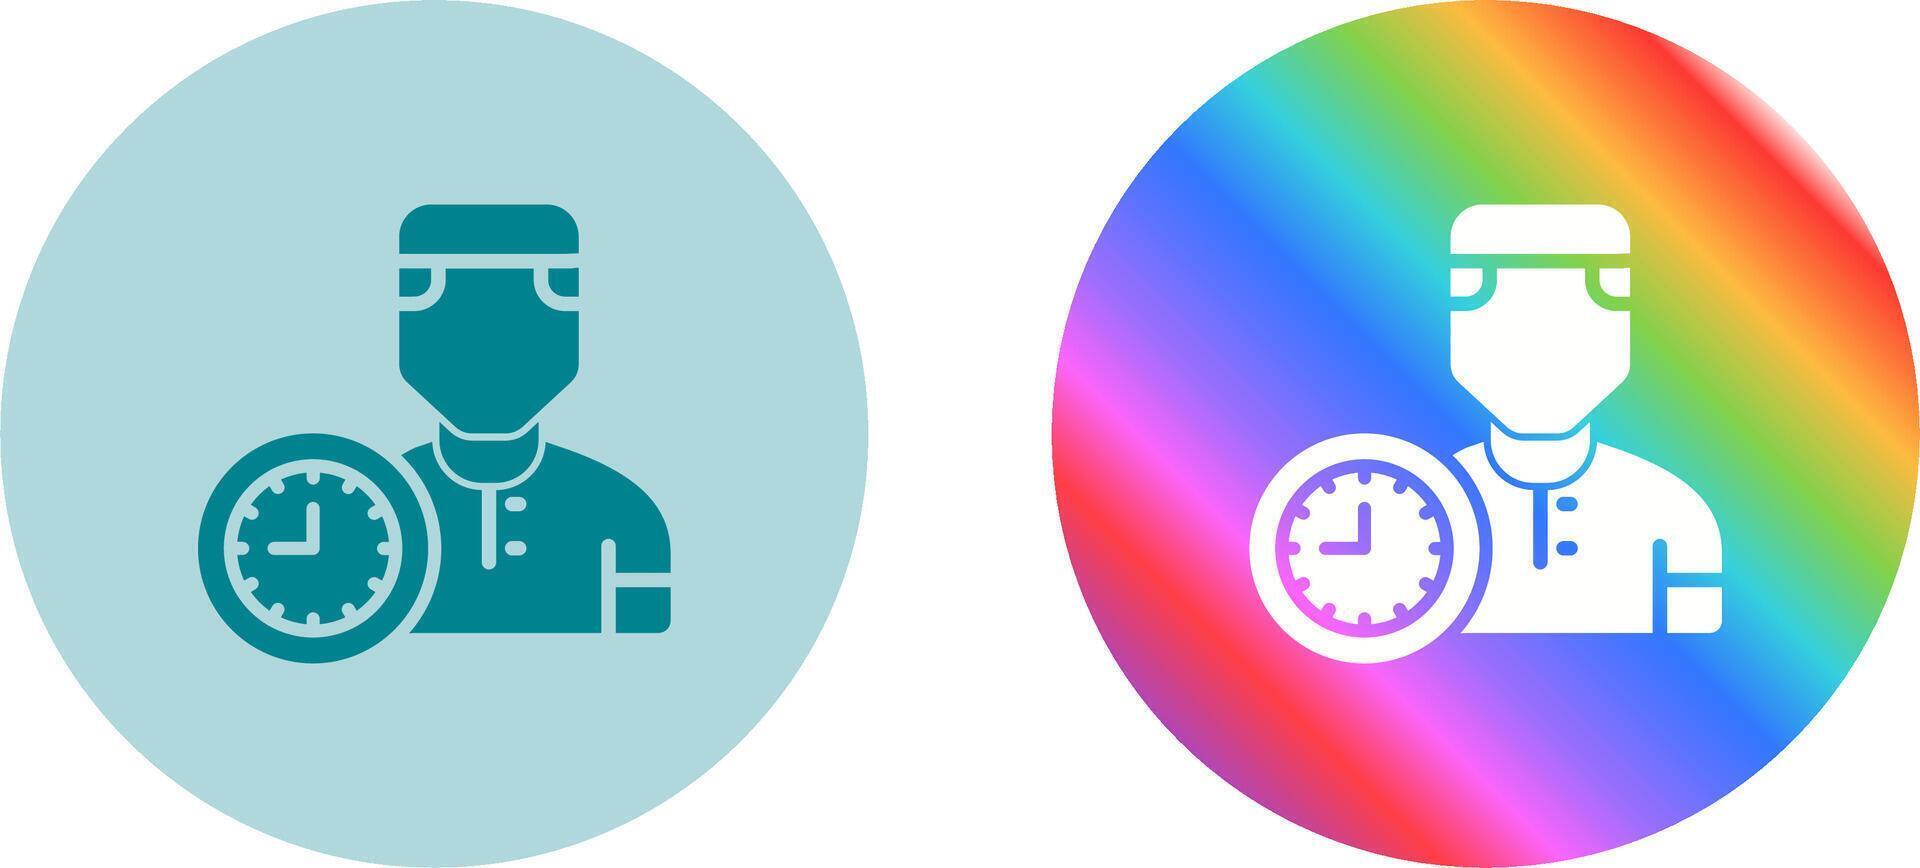 Working Hour Vector Icon